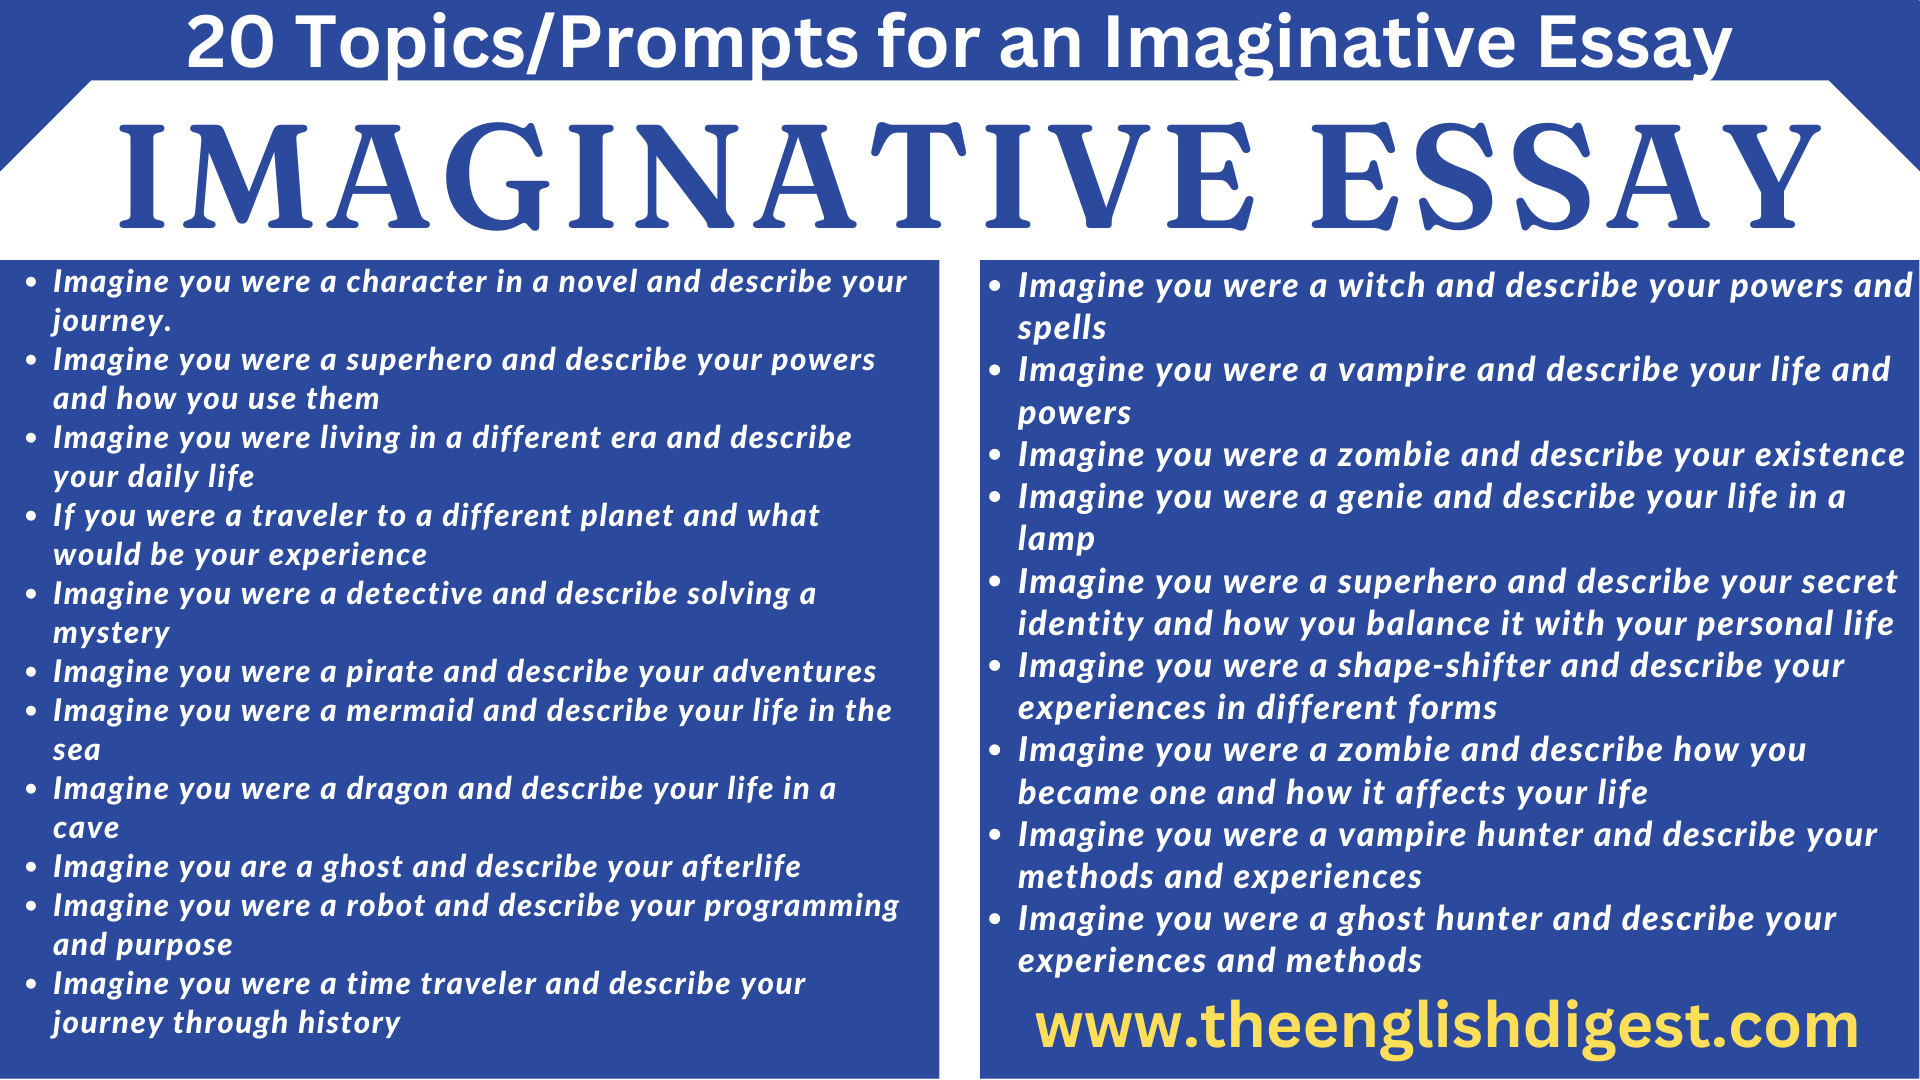 meaning of imaginative essay